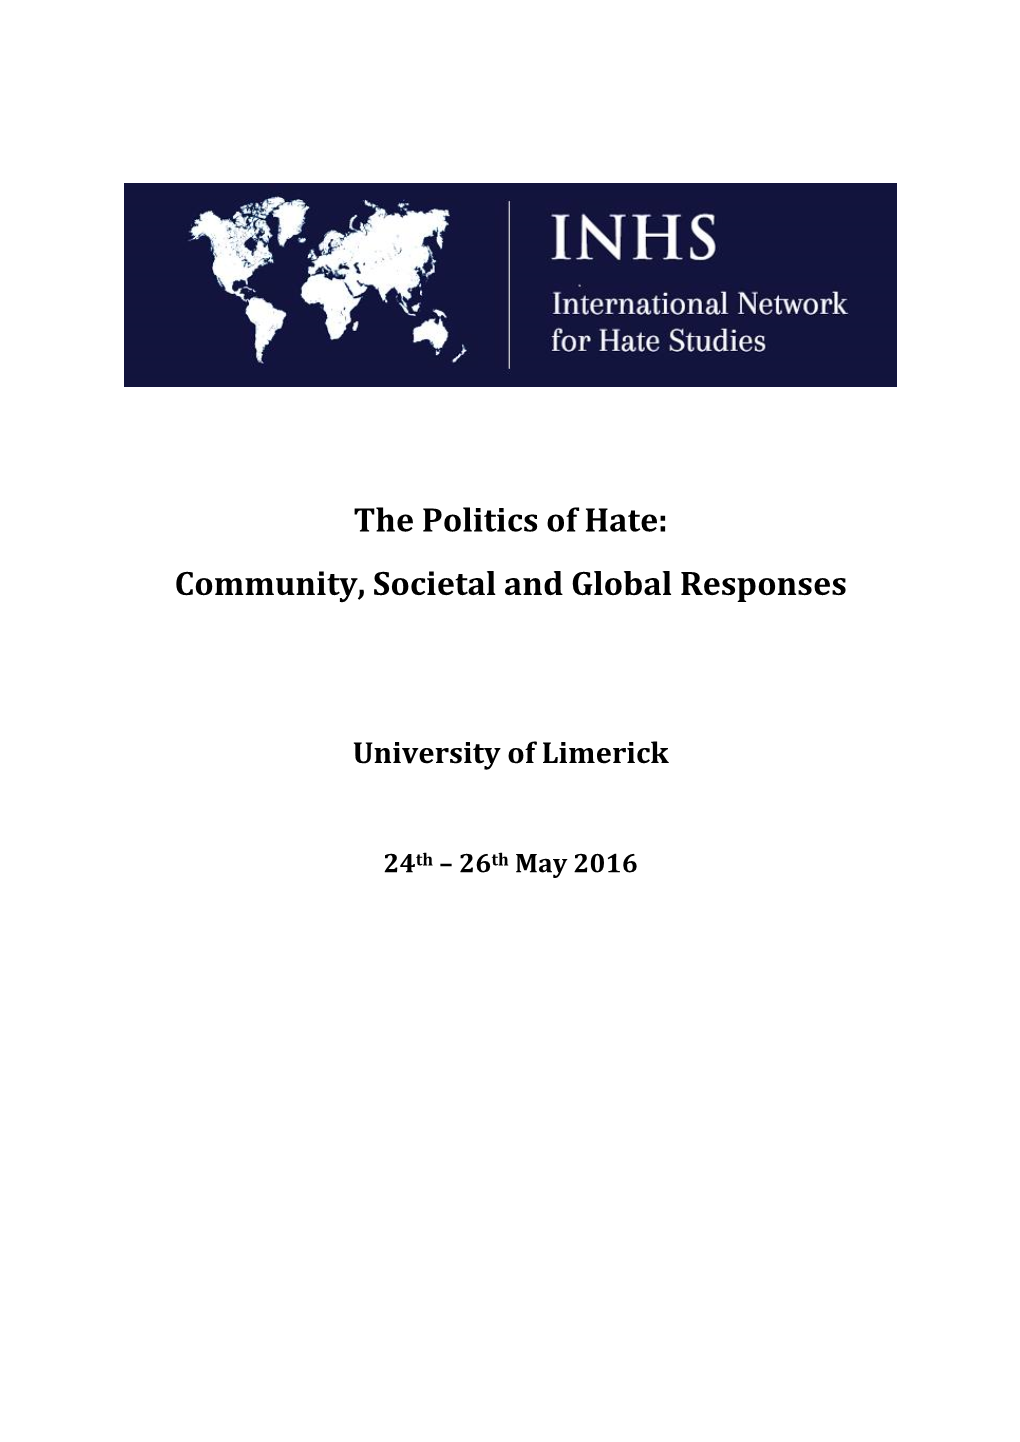 The Politics of Hate: Community, Societal and Global Responses